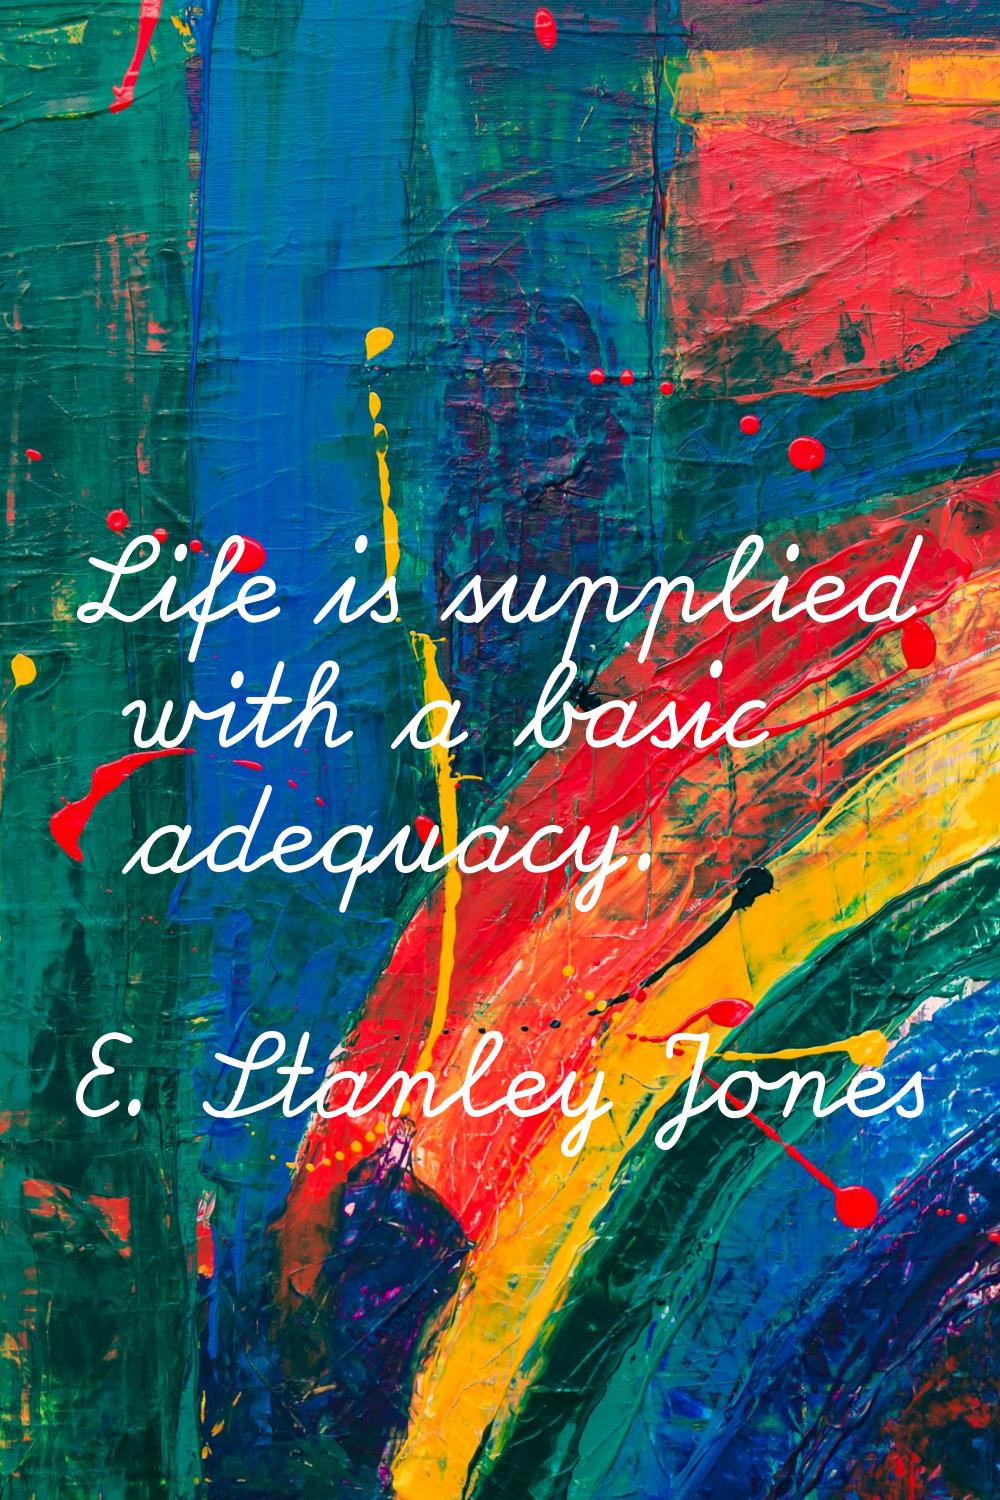 Life is supplied with a basic adequacy.